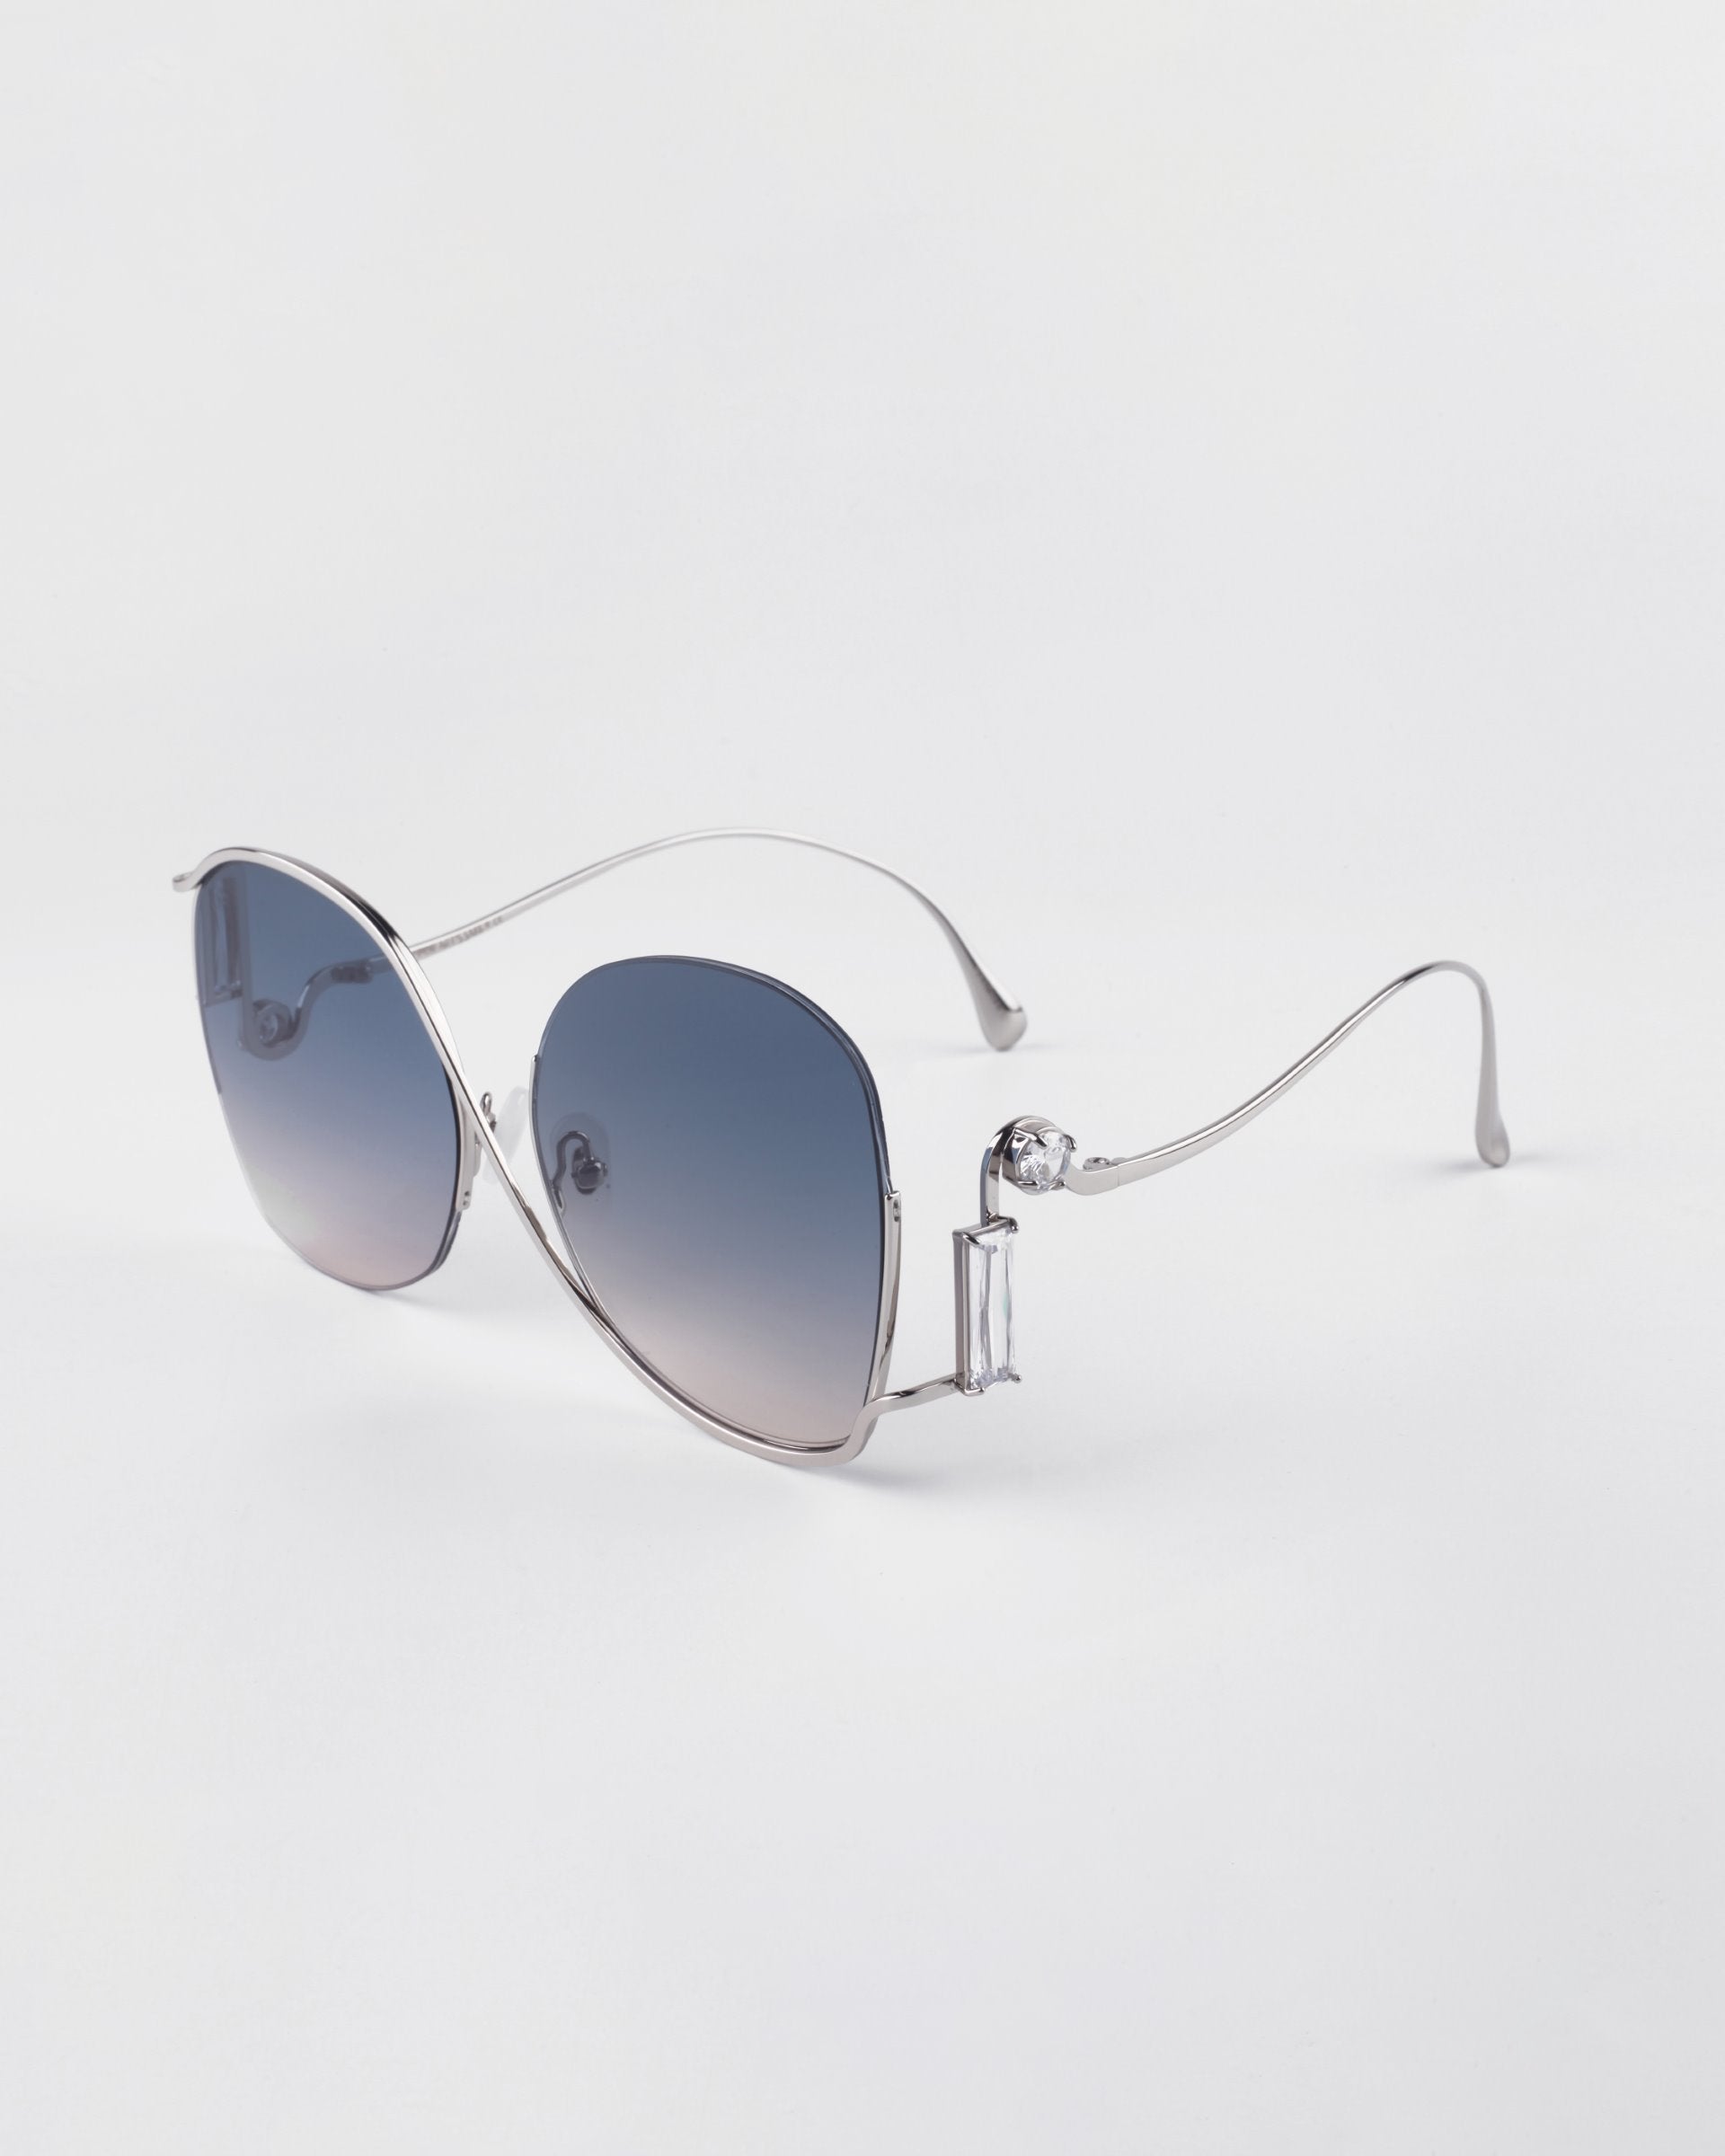 A pair of luxurious silver-framed Sapphire sunglasses from For Art&#39;s Sake® with dark gradient lenses is displayed against a plain white background. The sunglasses have a sleek, modern design with thin temples and slightly oversized lenses, offering exceptional UV protection for your eyes.